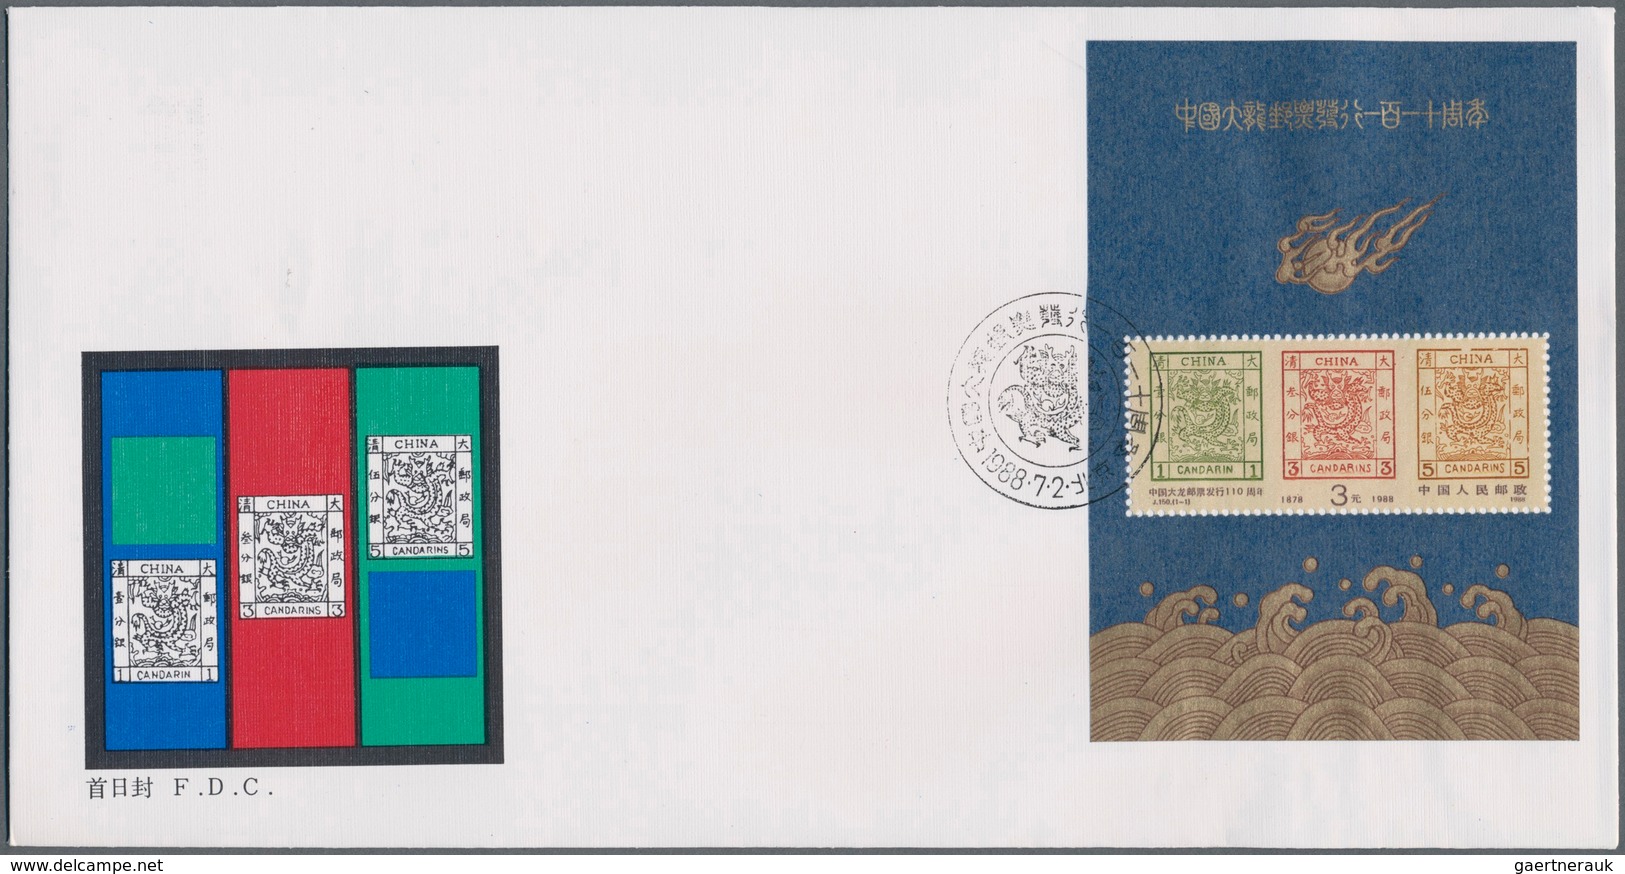 China - Volksrepublik: 1988/2002 (ca.), approx. 800 FDCs of souvenir sheets, usually in duplicates r